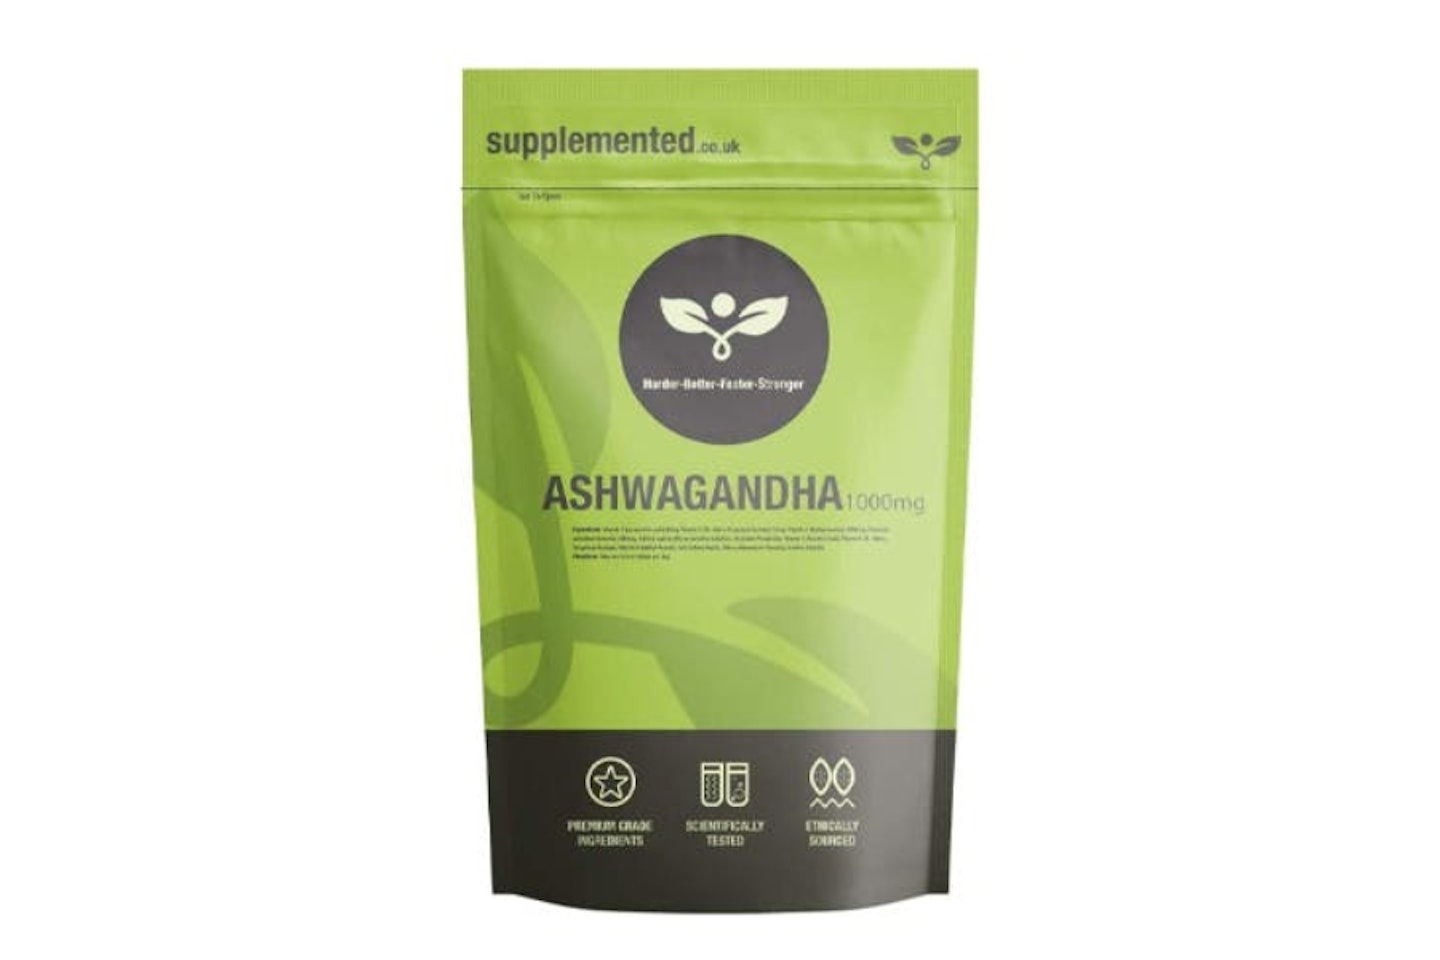 Supplemented Store Ashwagandha Extract 1000mg Tablets